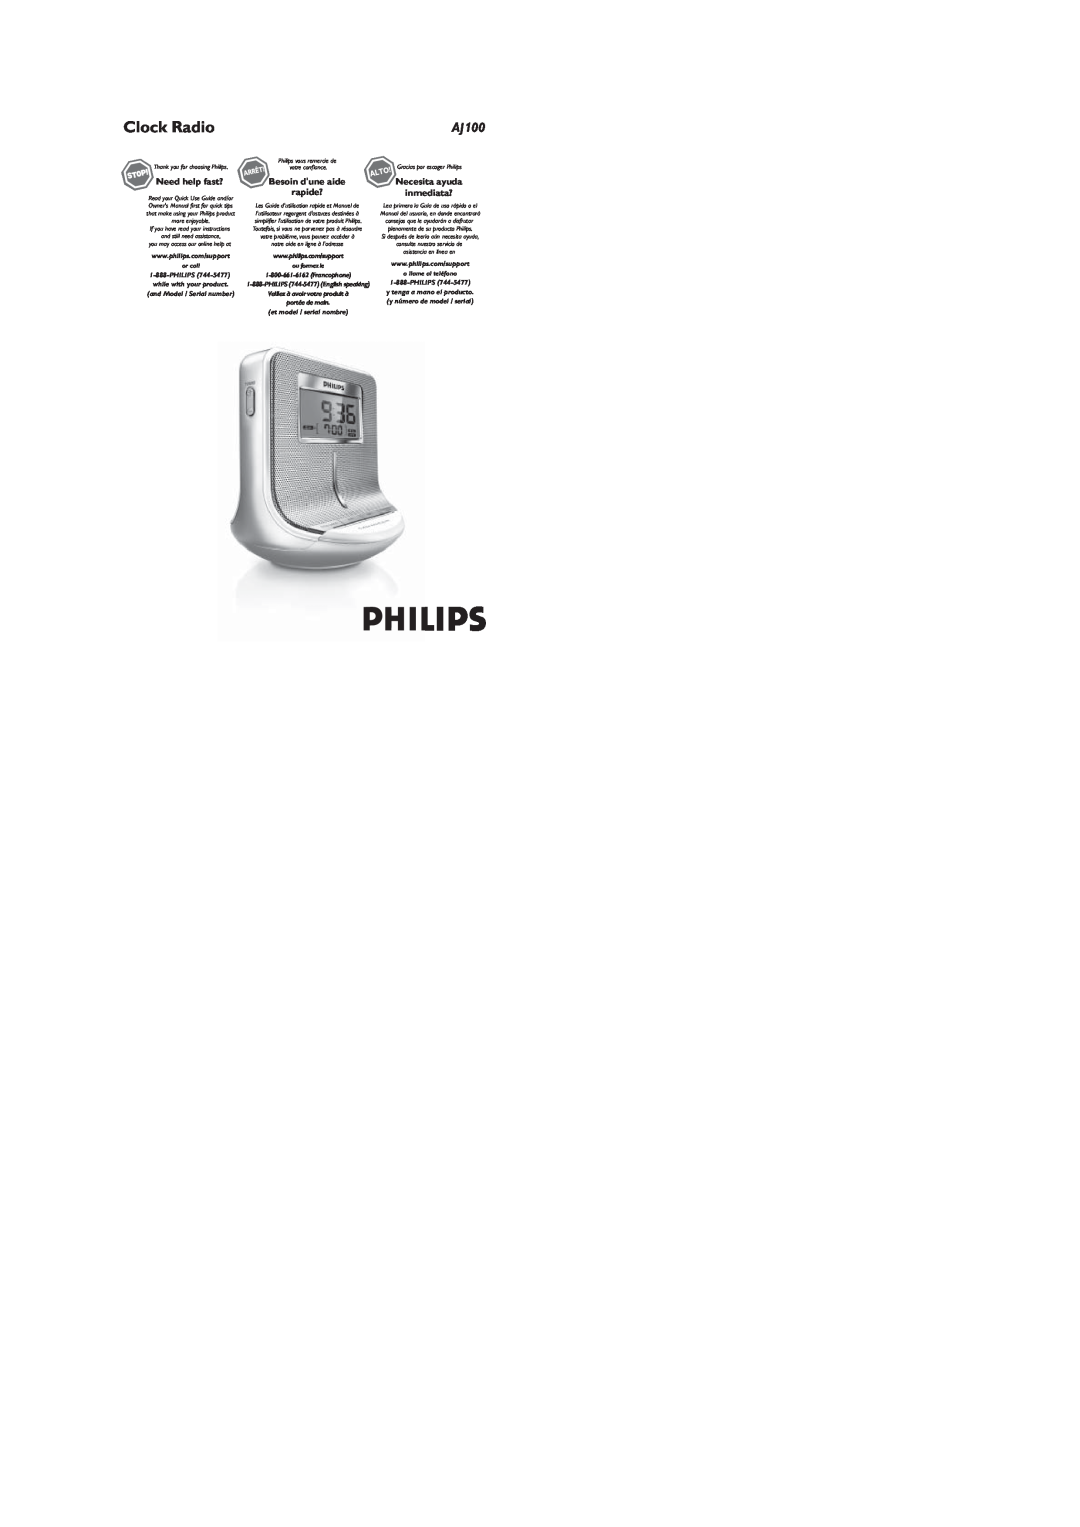 Philips quick start Thanks for buying Philips AJ100 clock radio, Clock Radio, Quick Start 